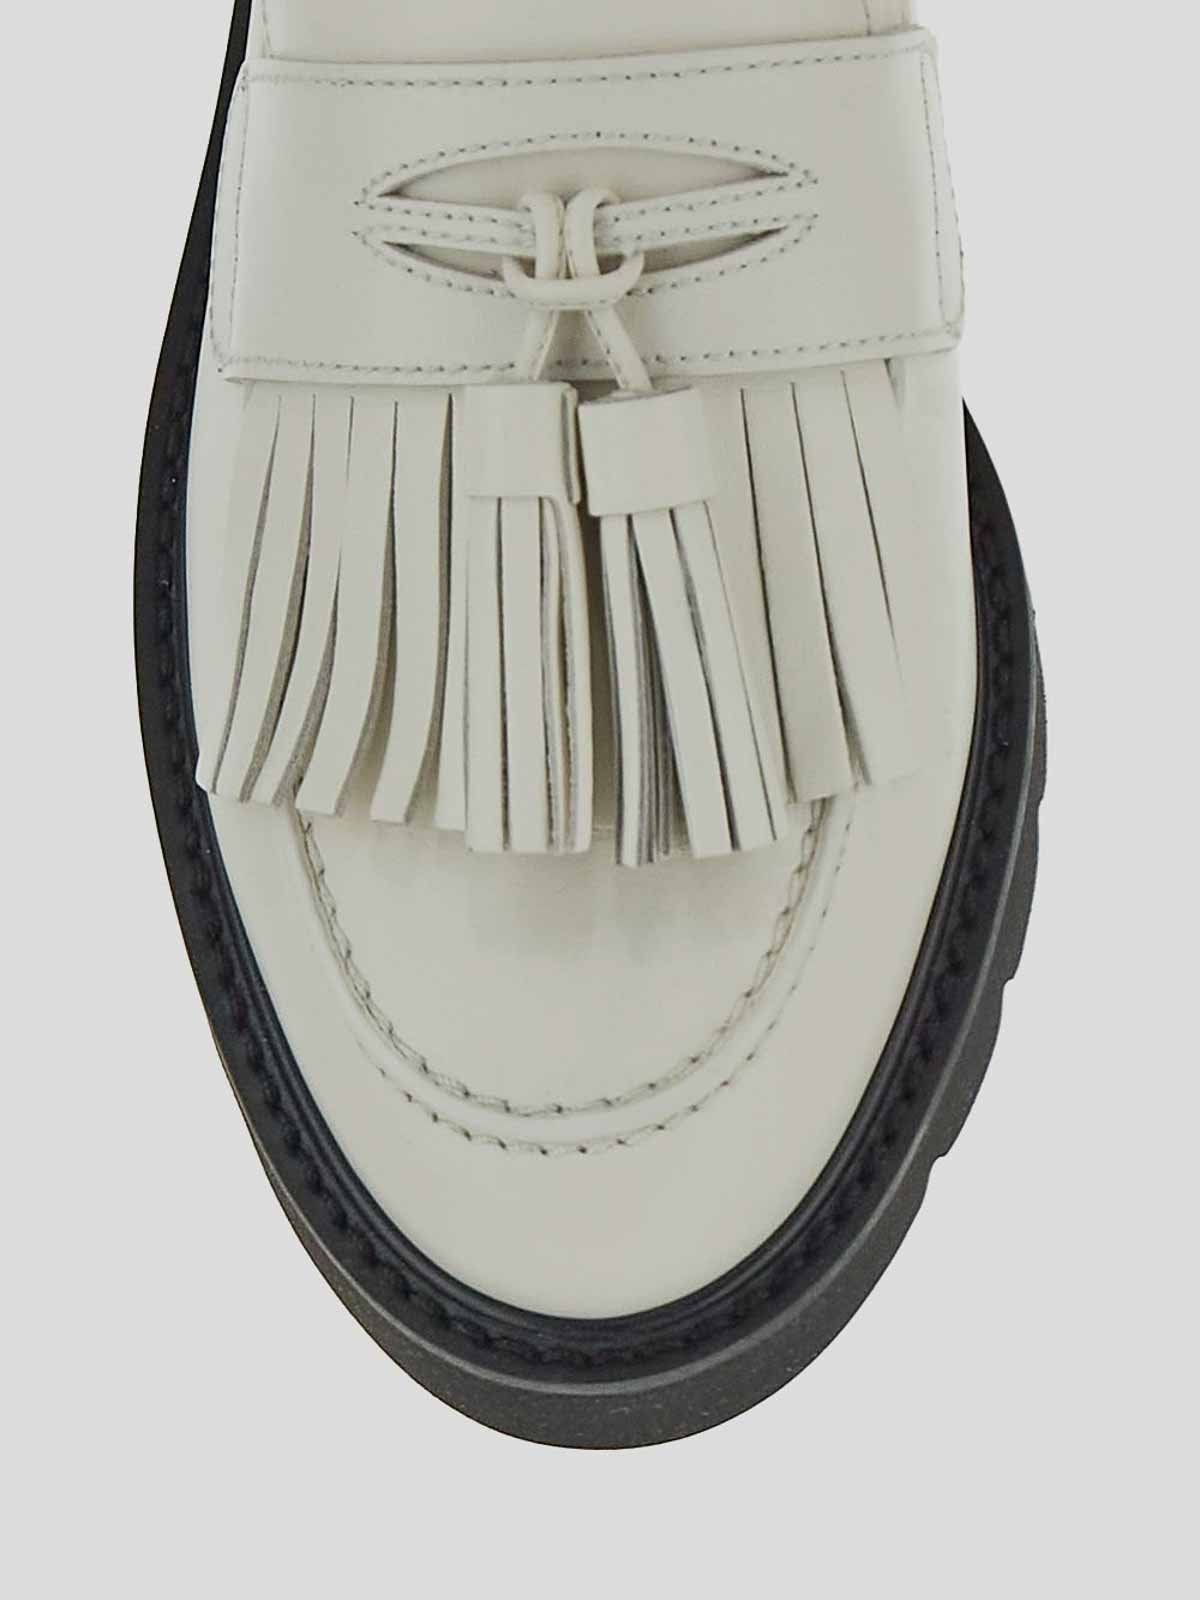 Shop Stuart Weitzman Fringes Loafers In White